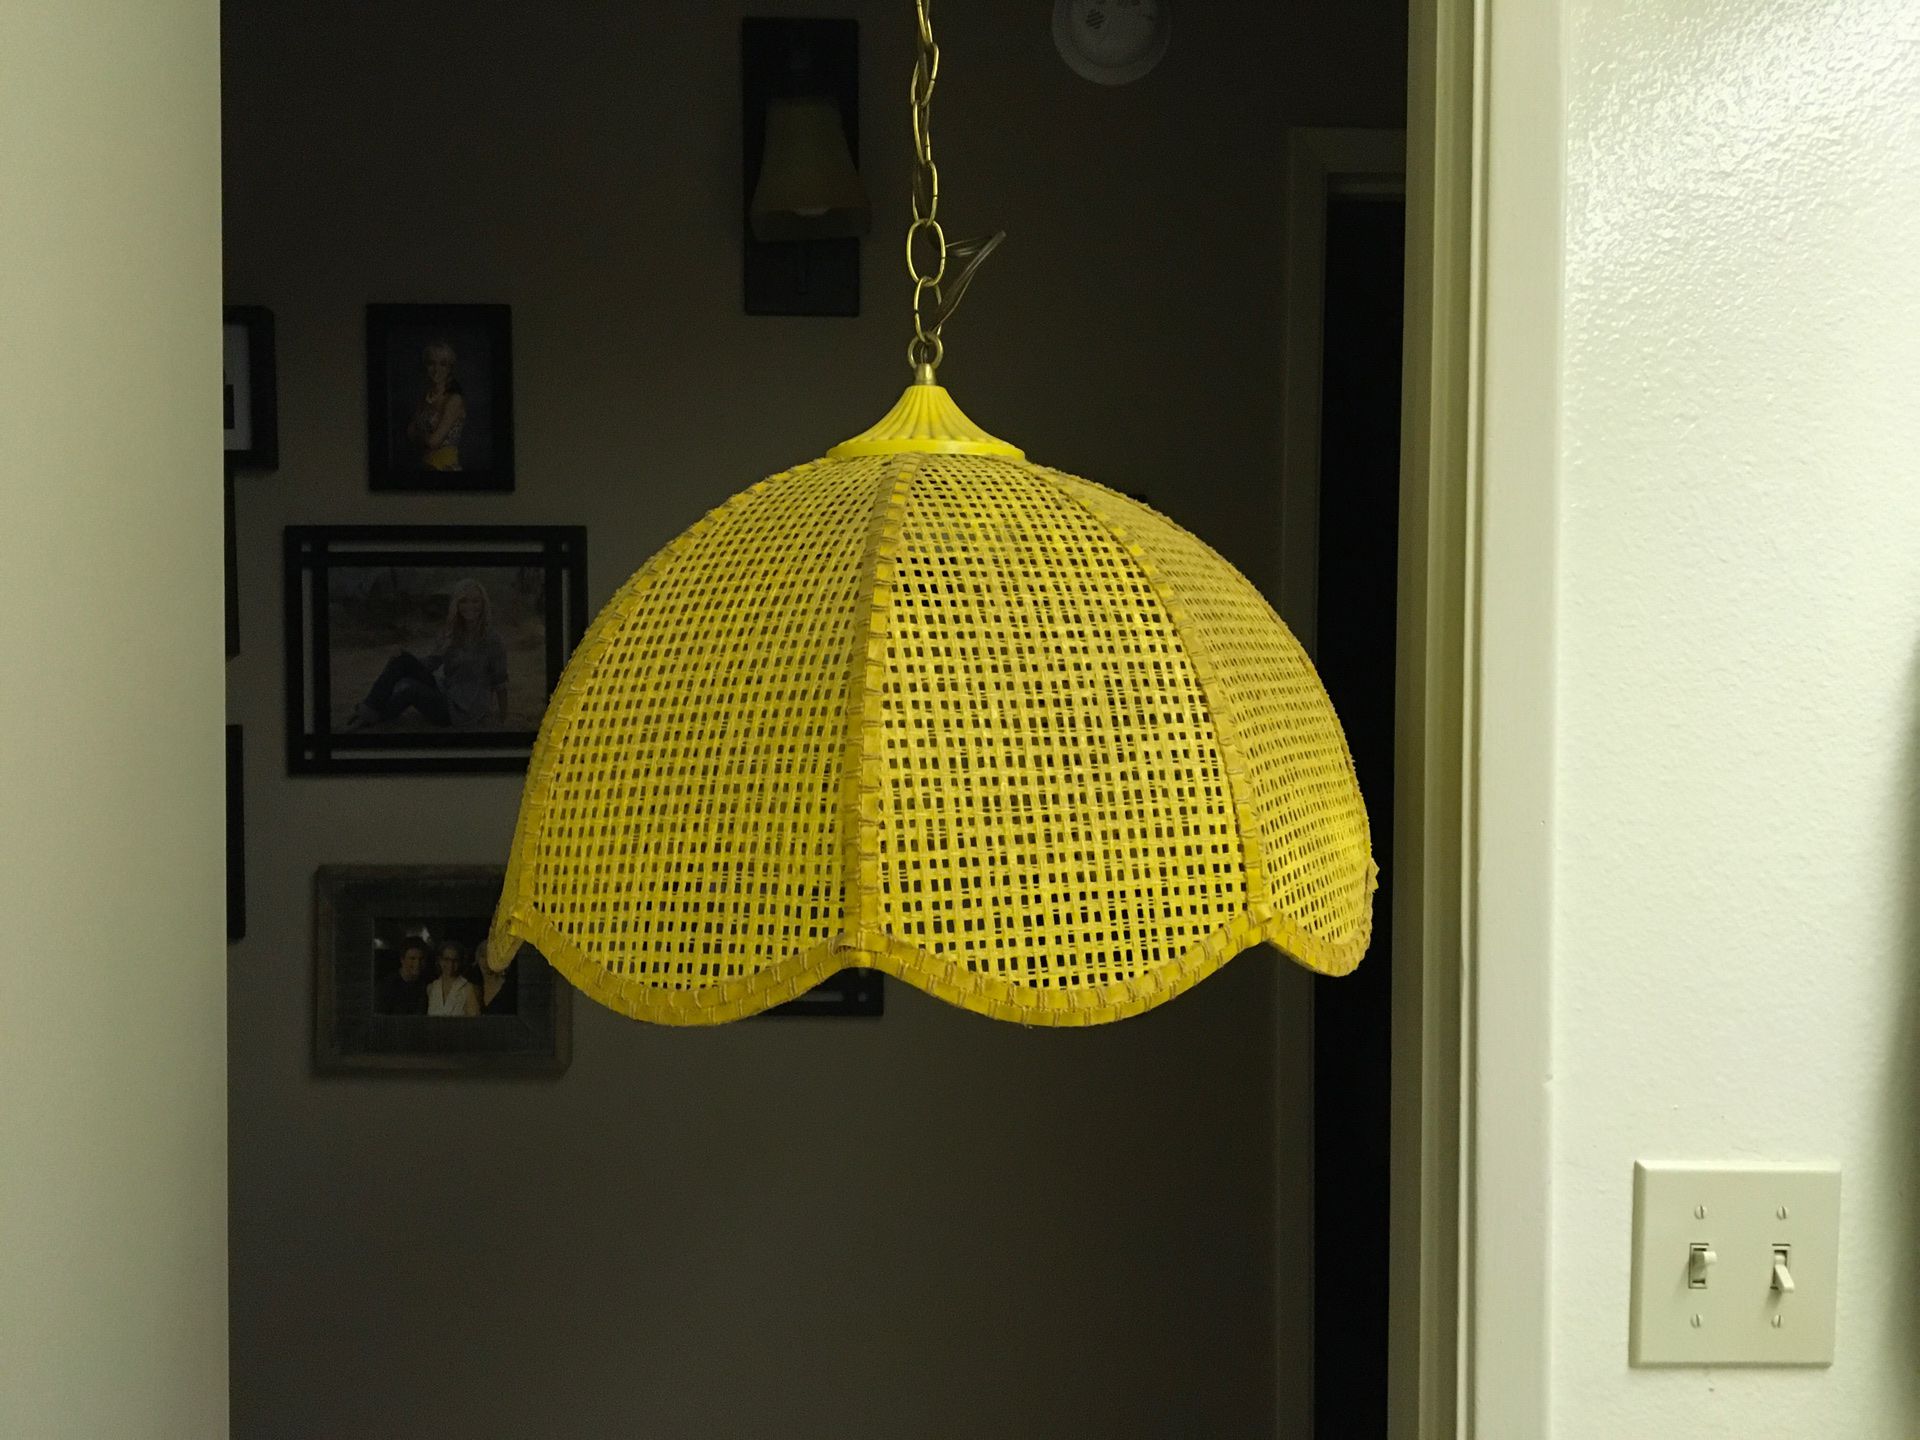 AWESOME HANGING LAMPS - that work